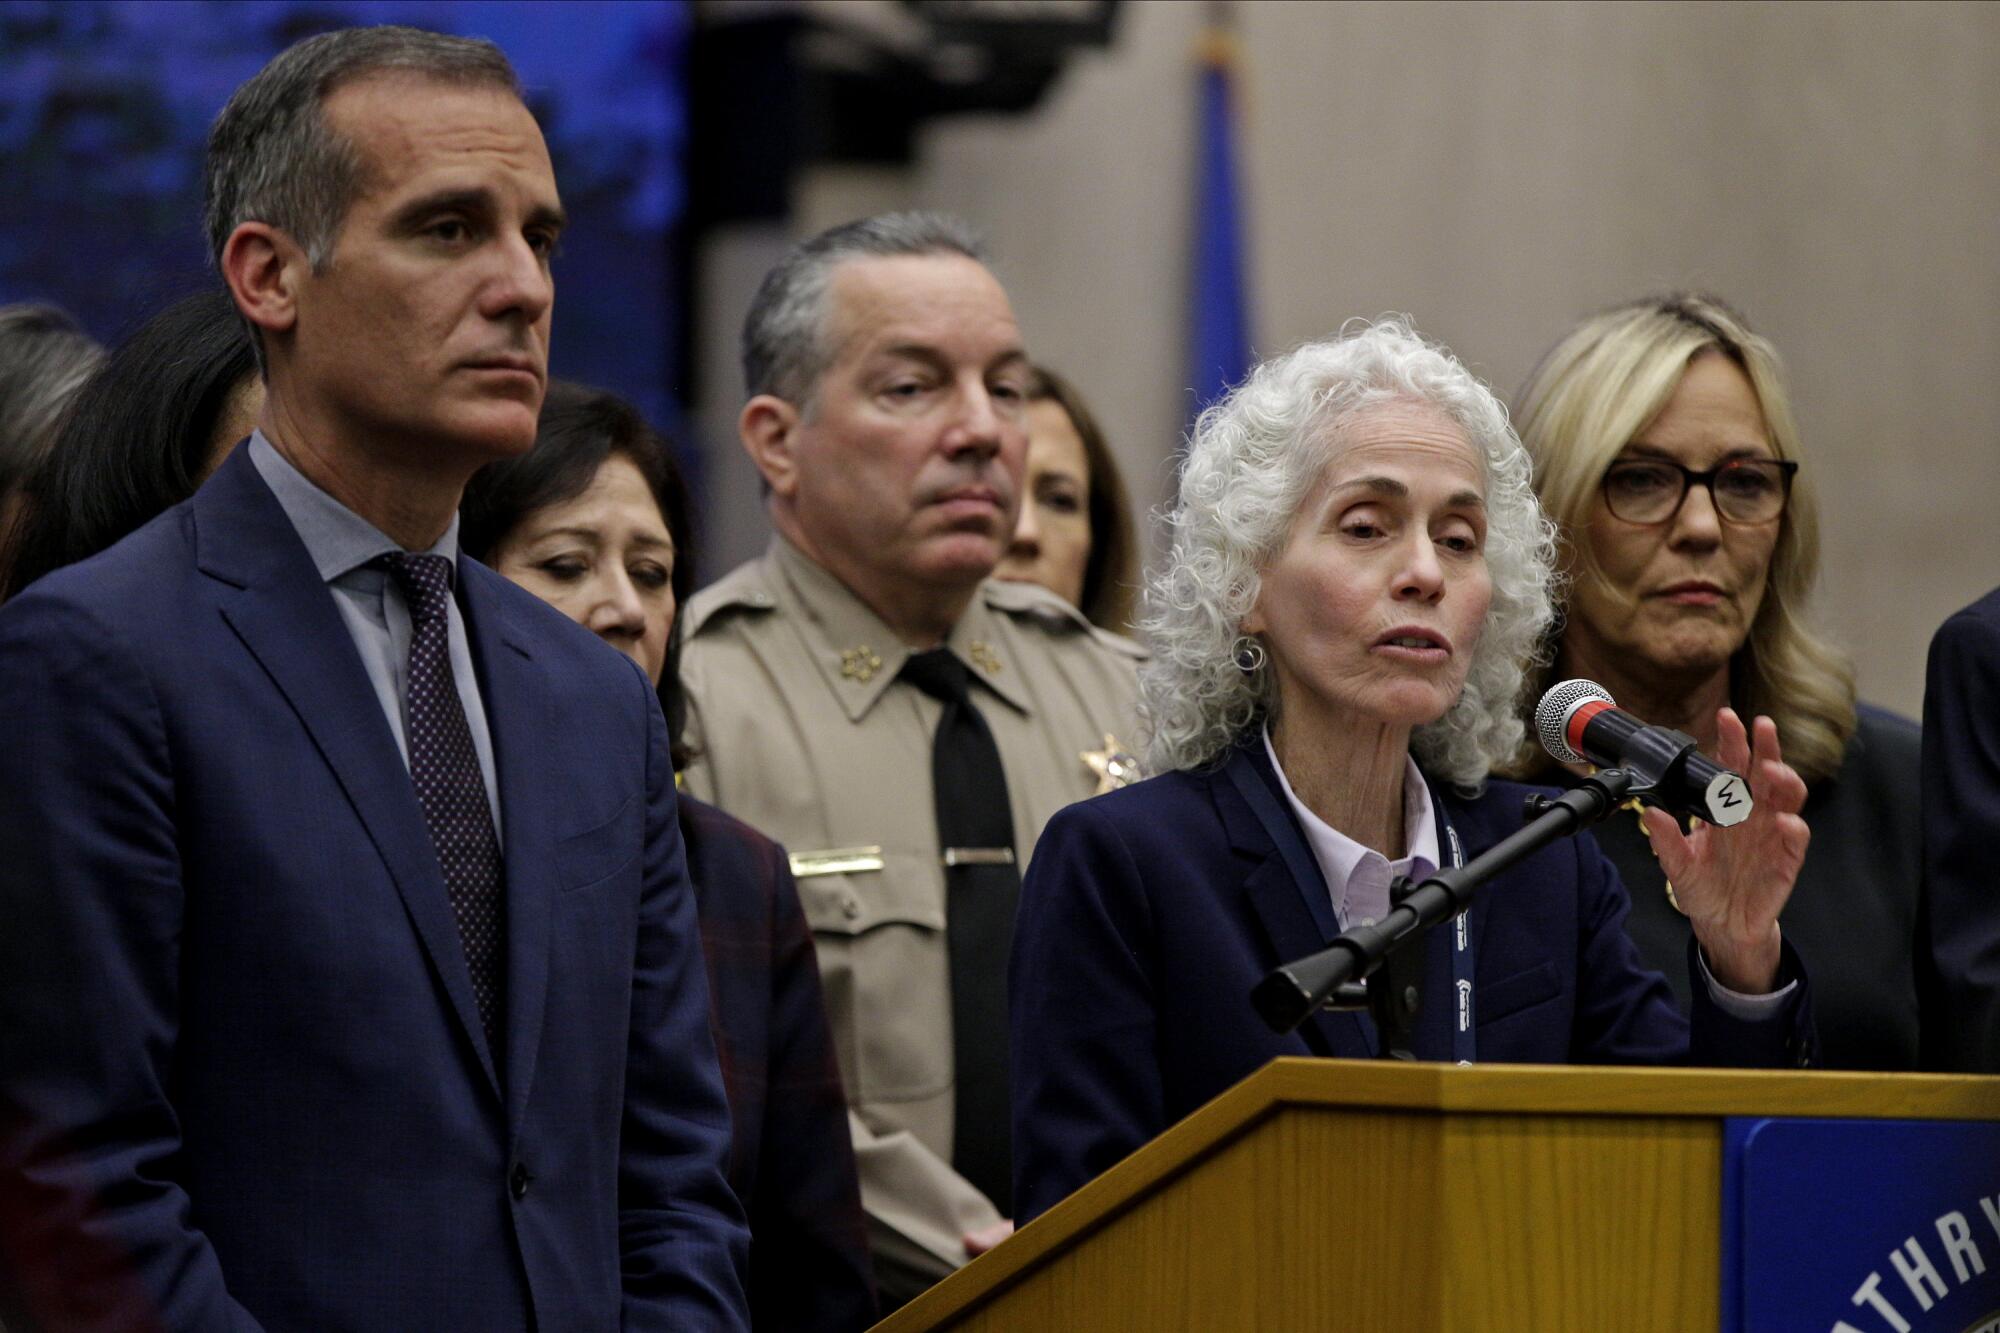 Los Angeles County Public Health Director Barbara Ferrer speaks at a news conference with L.A. Mayor Eric Garcetti, left.